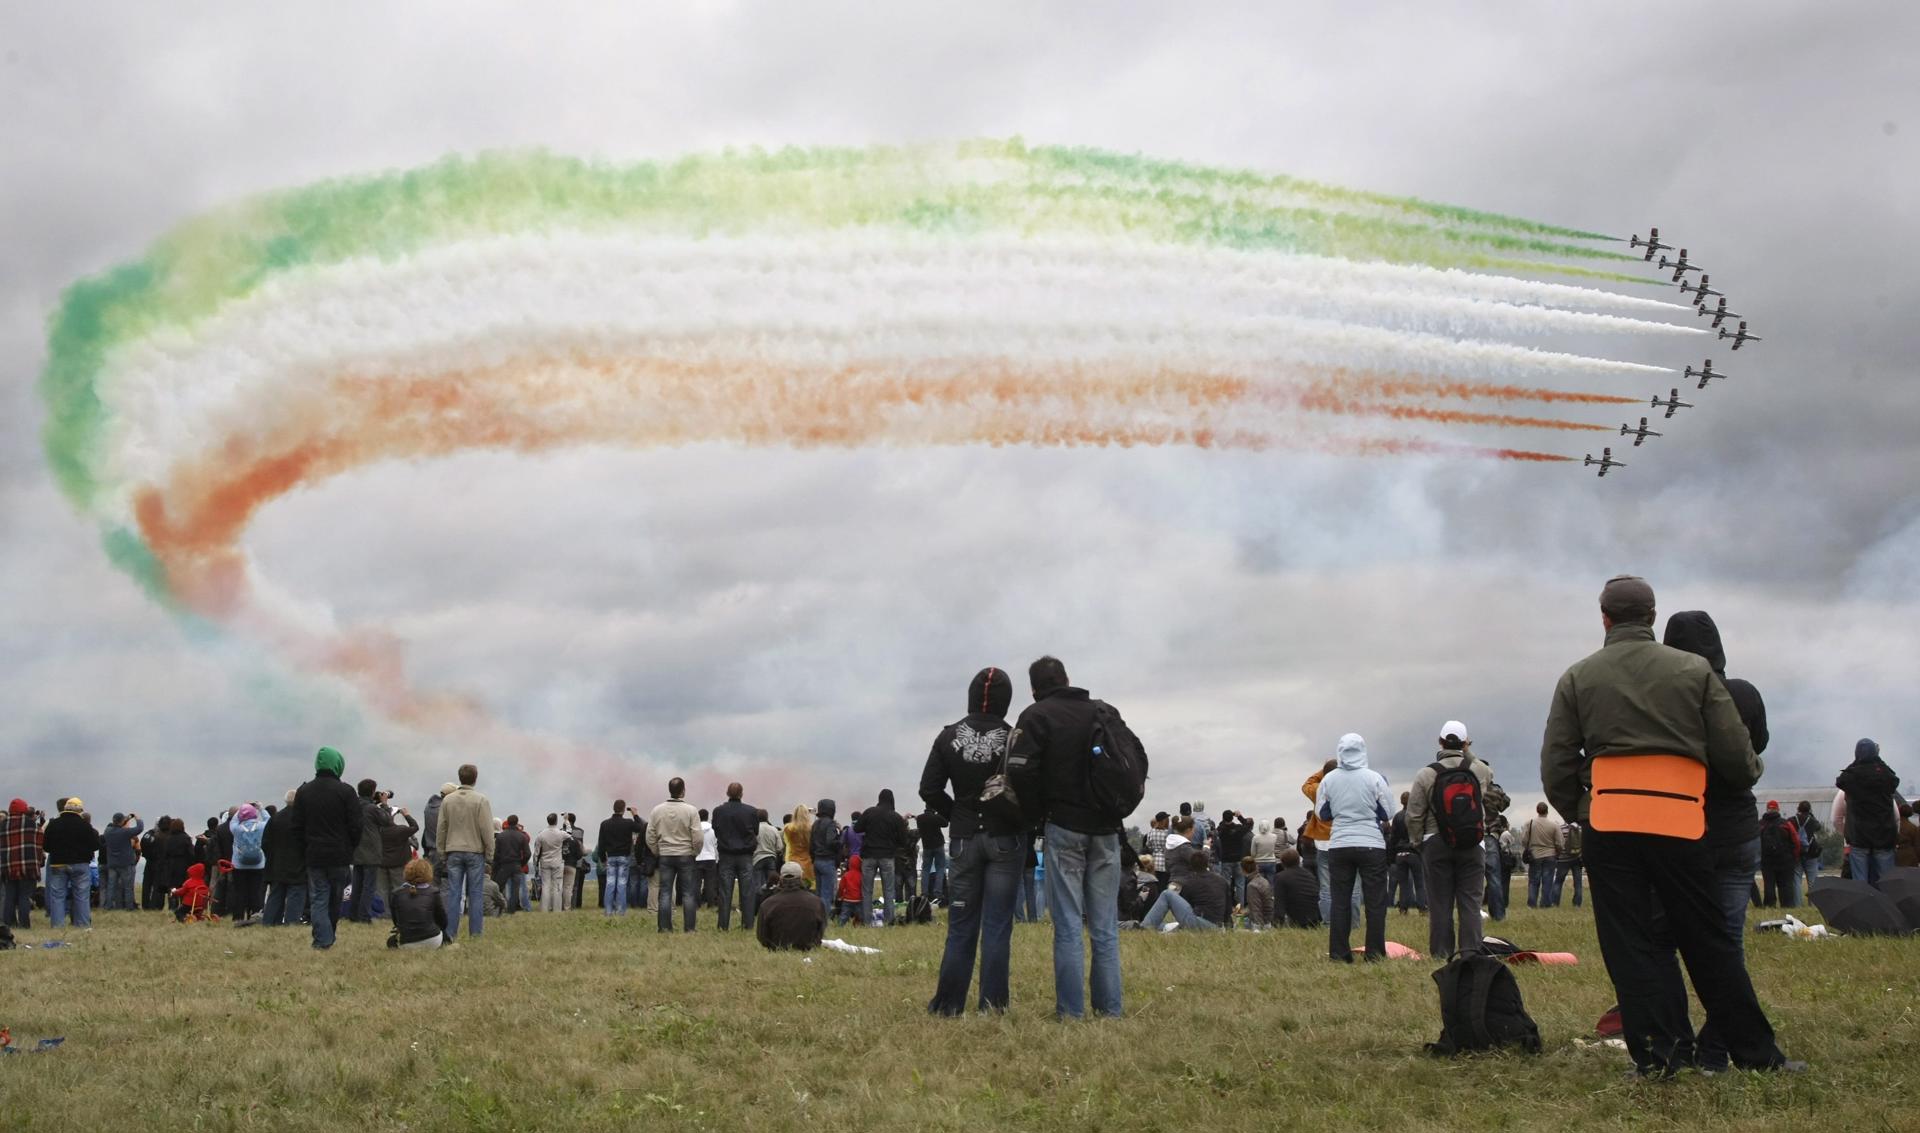 (FILE) Italian aerobatic group "Frecce tricolore" performs during the international air show "MAKS 2009" on Aug. 21, 2009, in the city of Zhukovsky, outside Moscow, Russia, today, Friday, Aug. 21. EFE/Sergei Chirikov